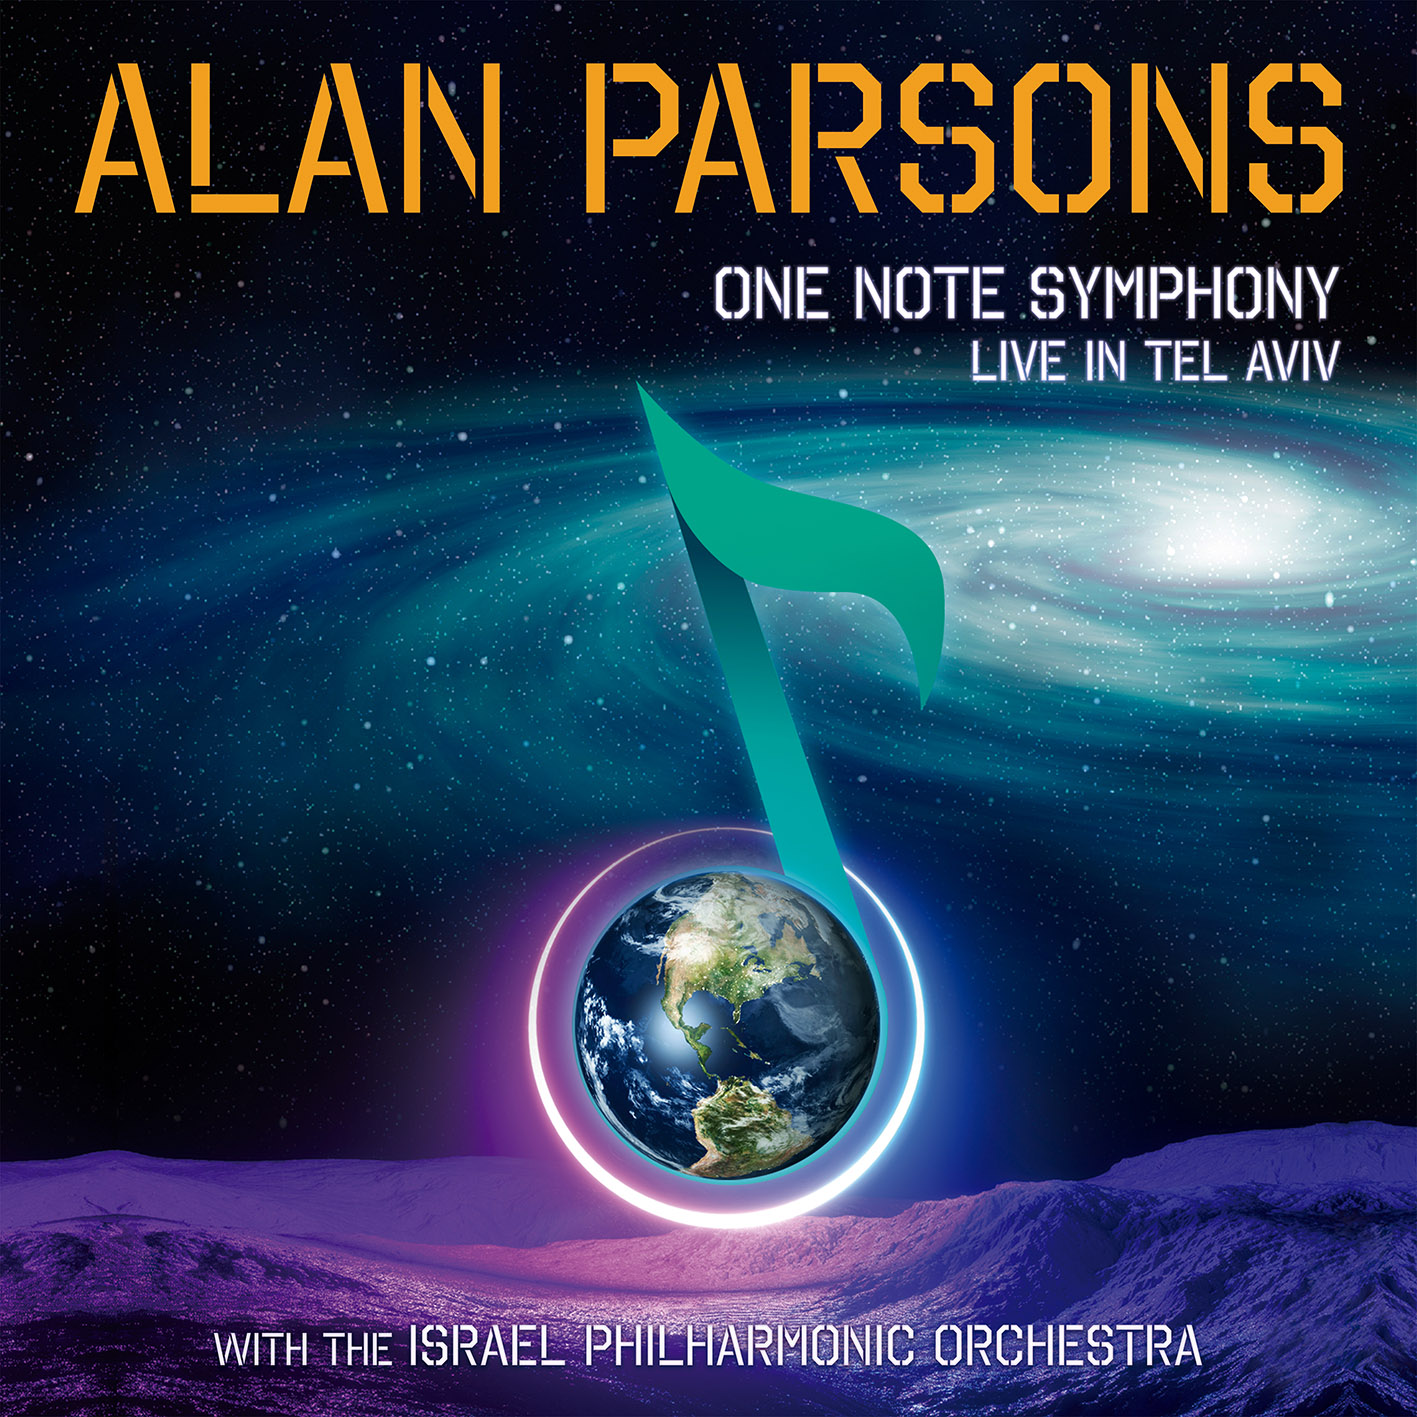 Alan Parsons - One Note Symphony: Live In Tel Aviv - 2xCD+DVD